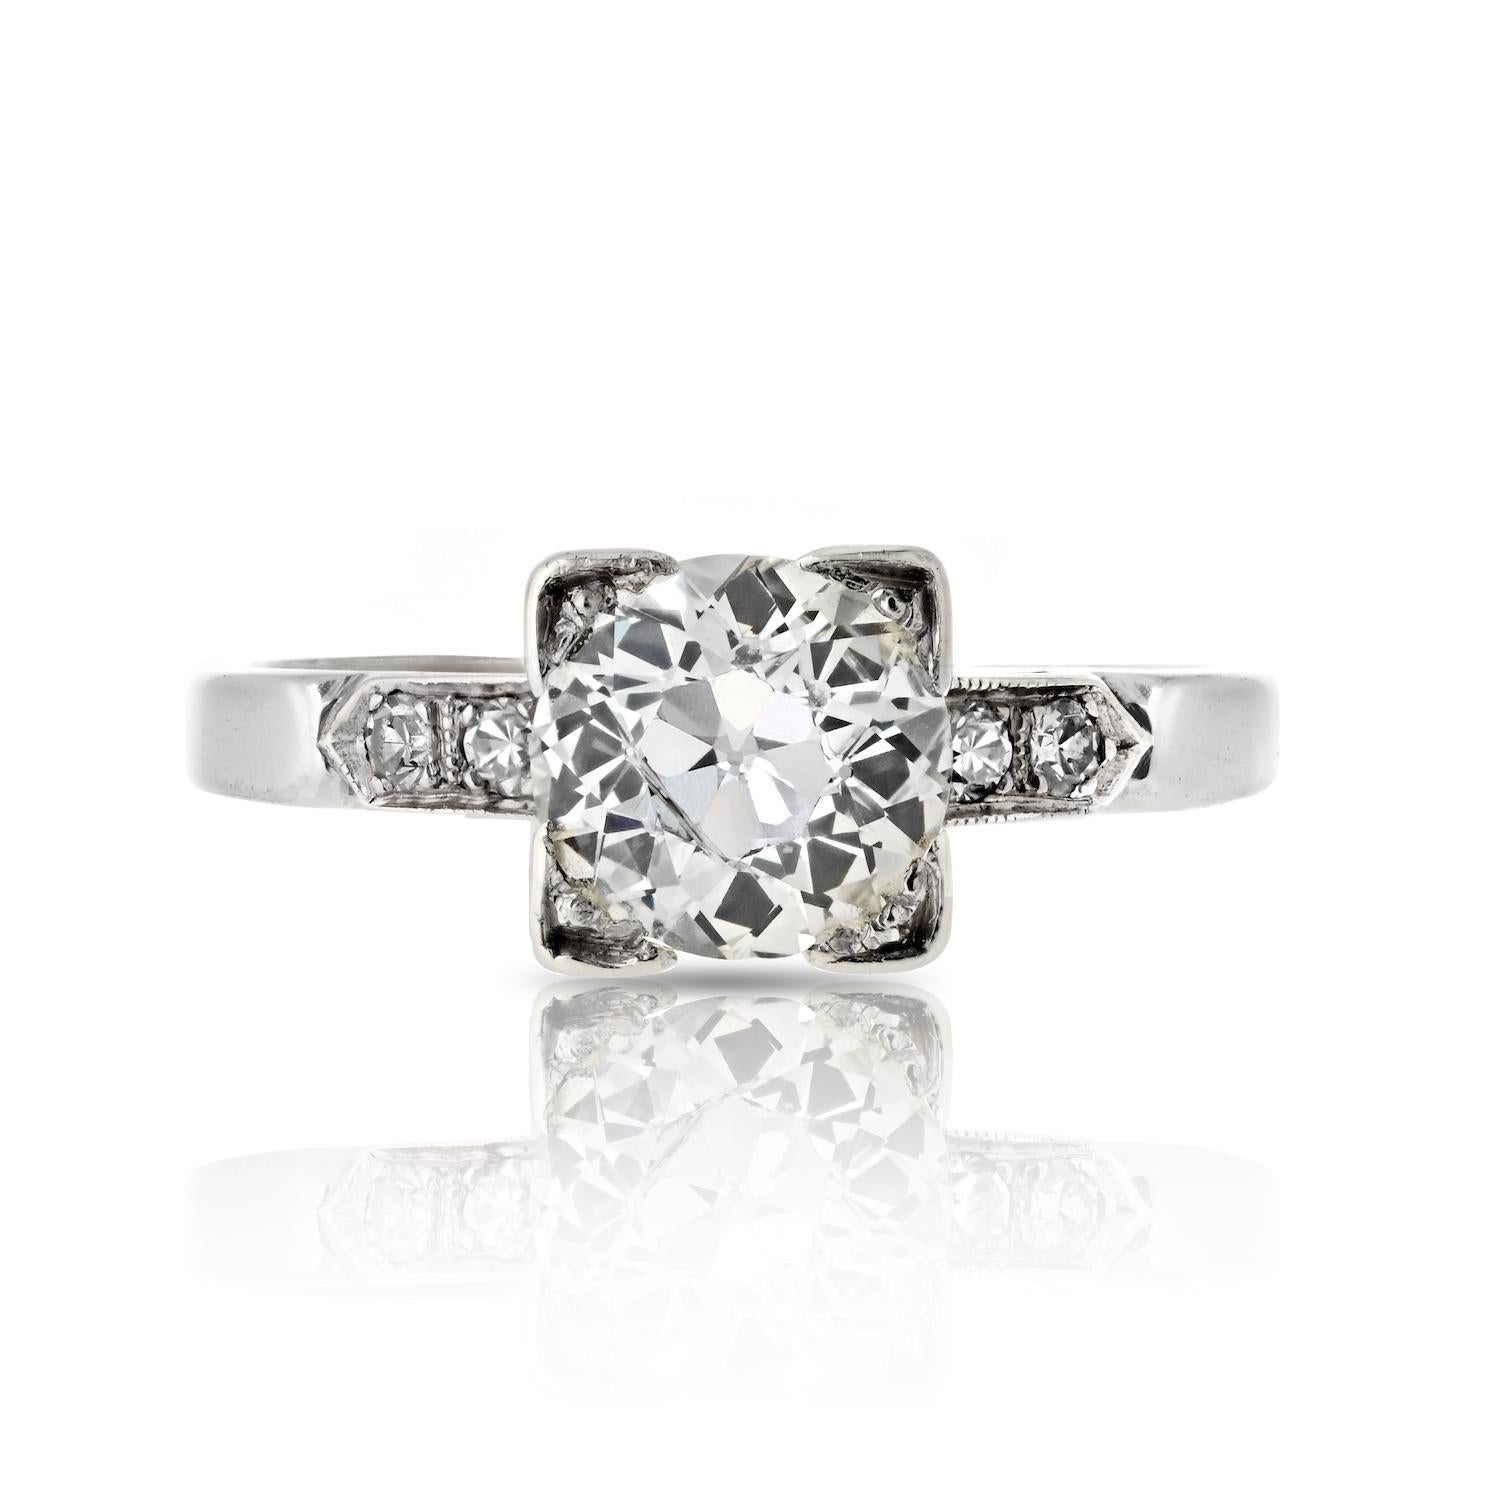 Elevate your love story with our enchanting vintage 14K white gold engagement ring, featuring a captivating 1.40-carat (approx.) Old European Cut Diamond. This timeless piece is a celebration of romance and enduring elegance.

The centerpiece of